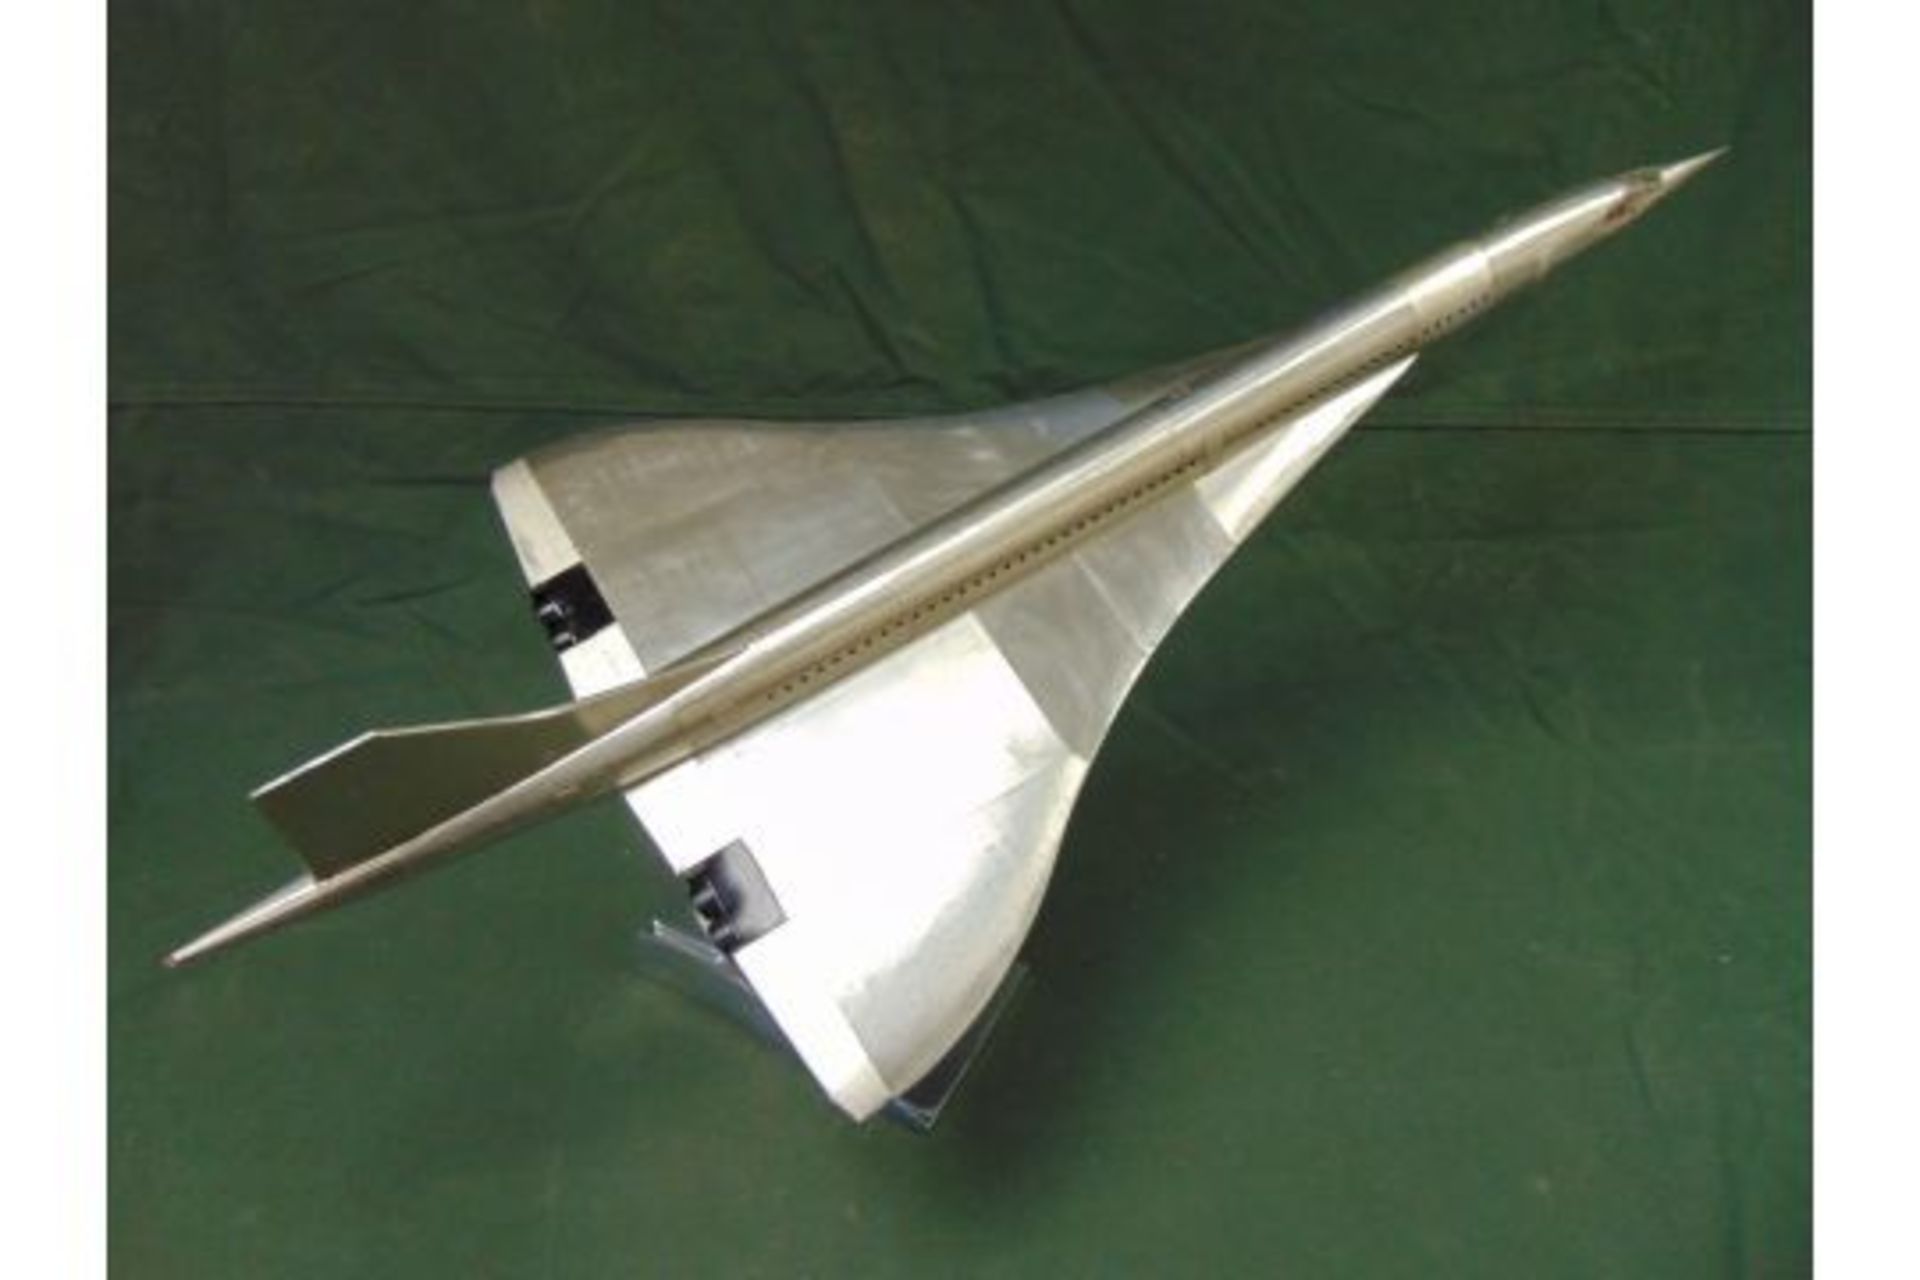 JUST LANDED A BEAUTIFUL!! Large Aluminium CONCORDE Model - Image 2 of 14